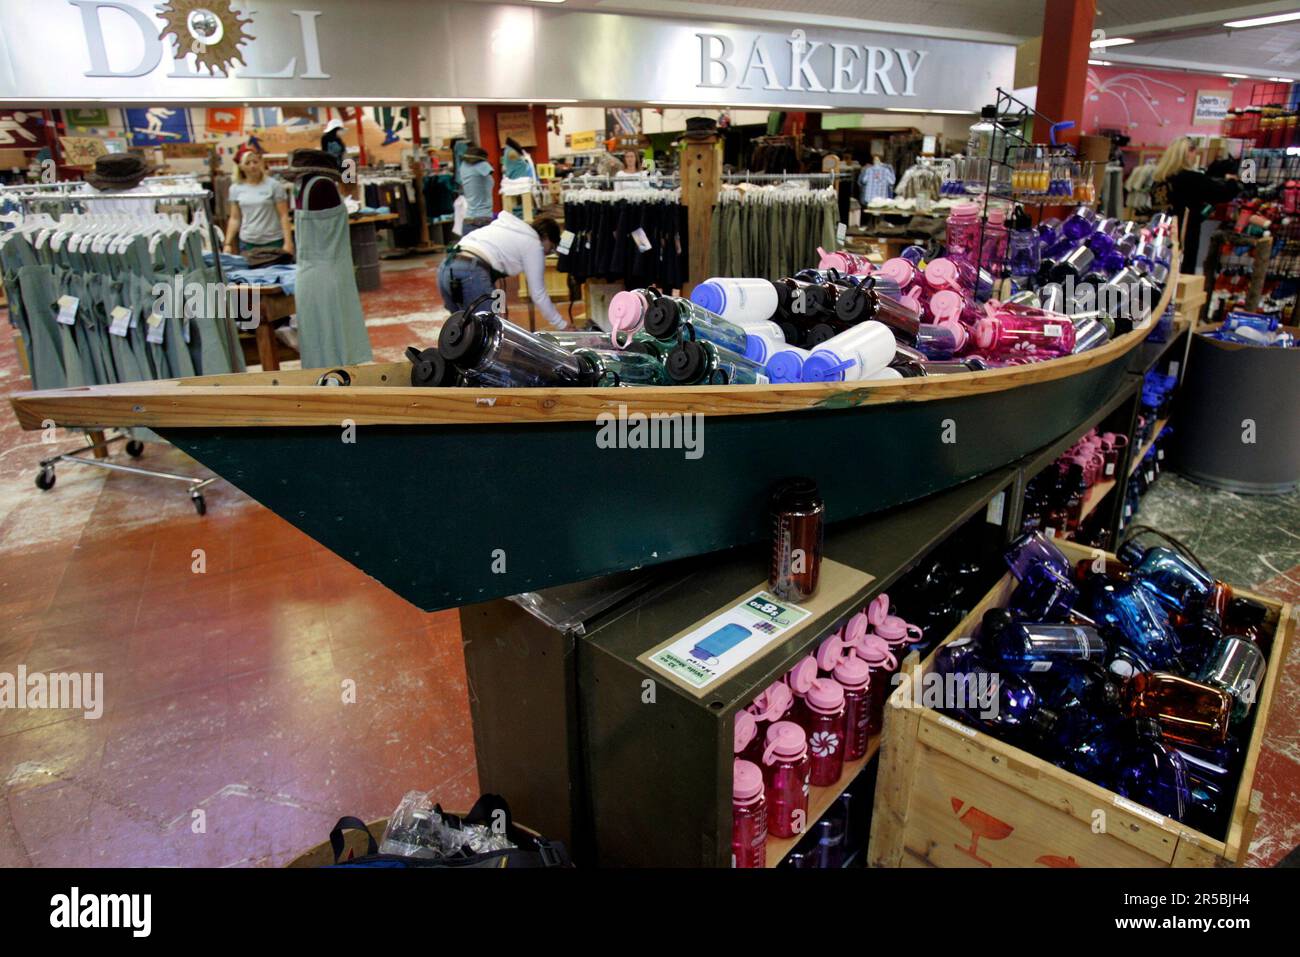 The Sports Basement carries boatloads of water bottles and other  merchandise at the Presidio in San Francisco, Calif. on Saturday, June 9,  2007. The successful sporting goods retailer is slated to open